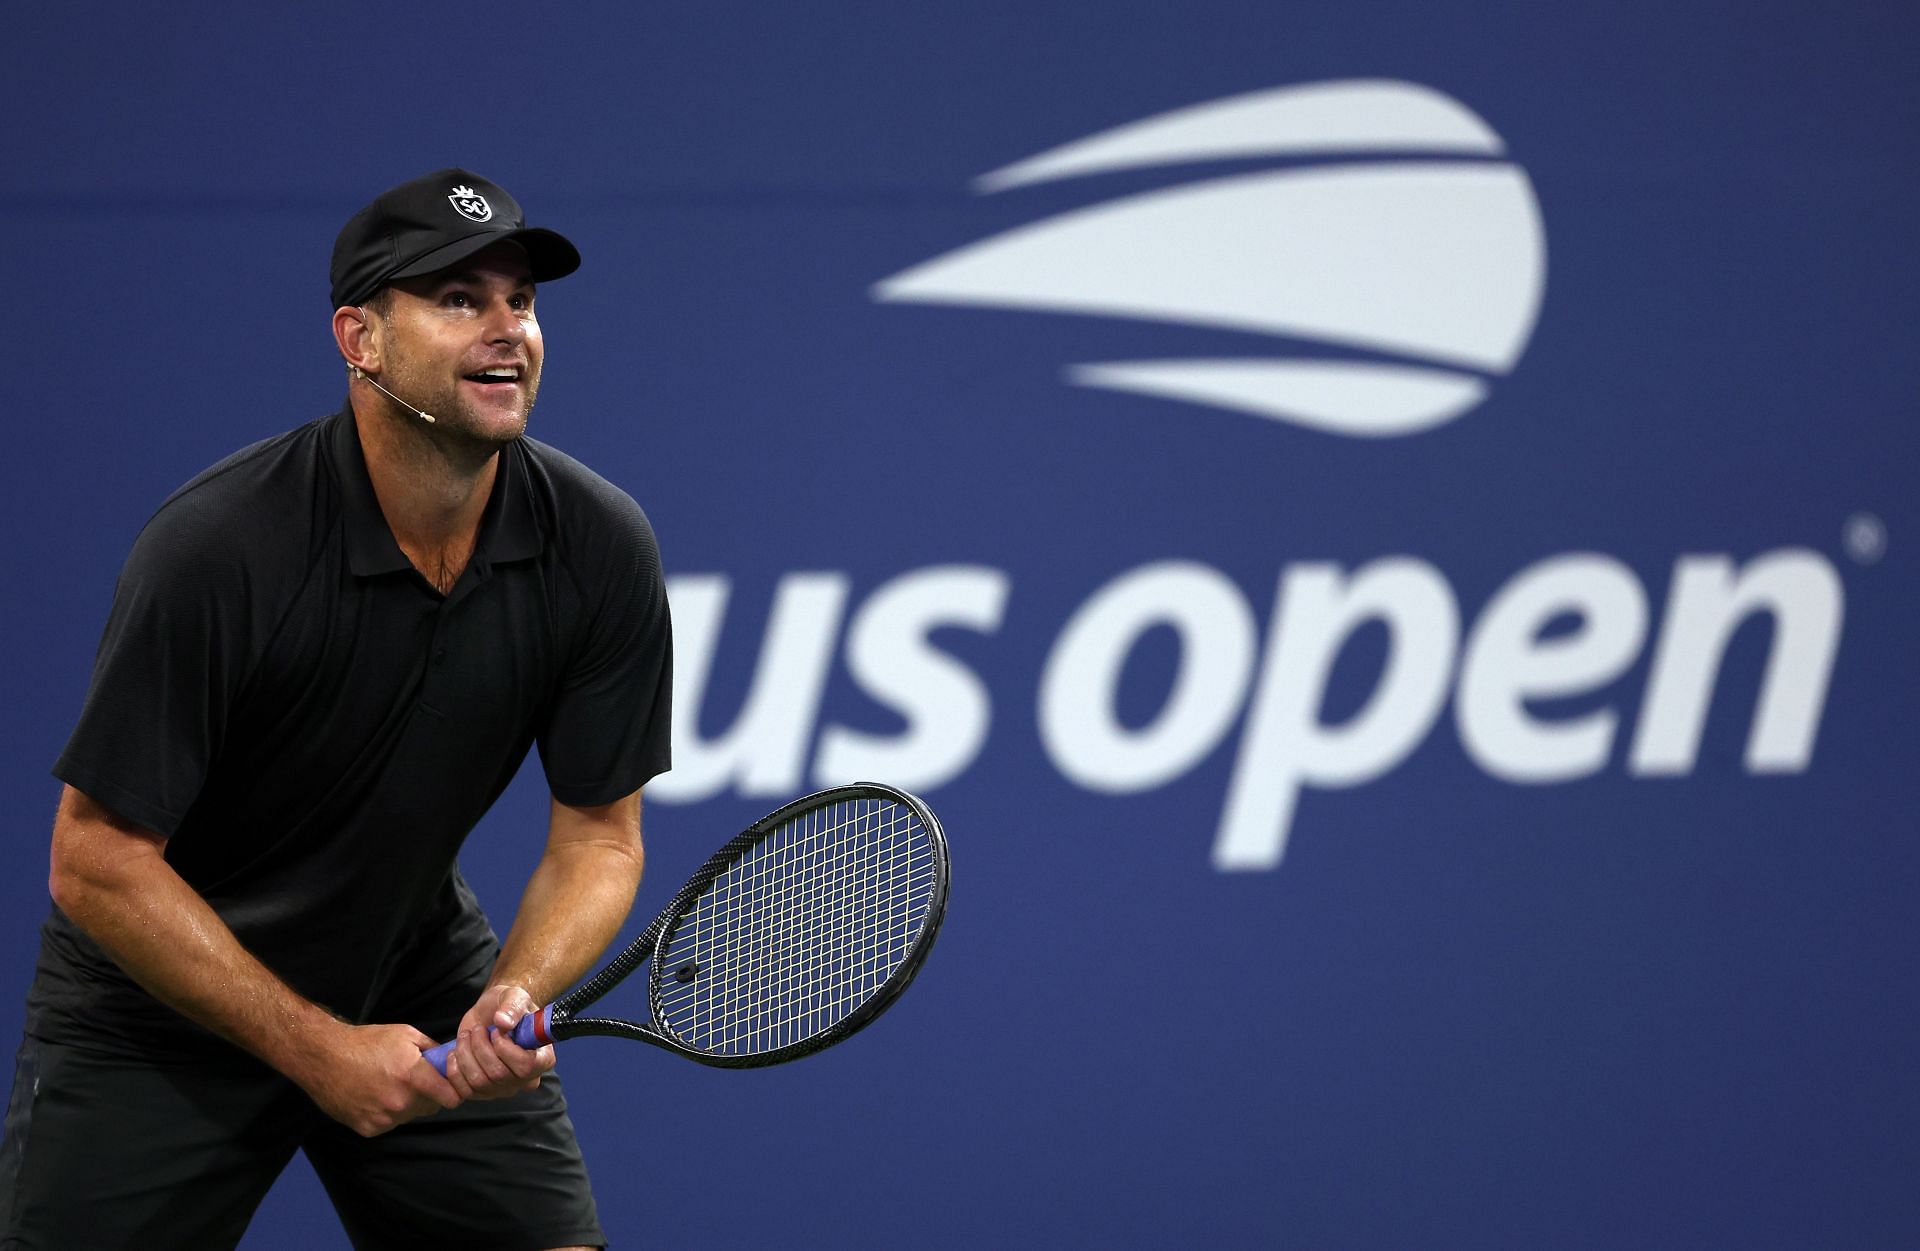 Andy Roddick at the US Open Legends Match